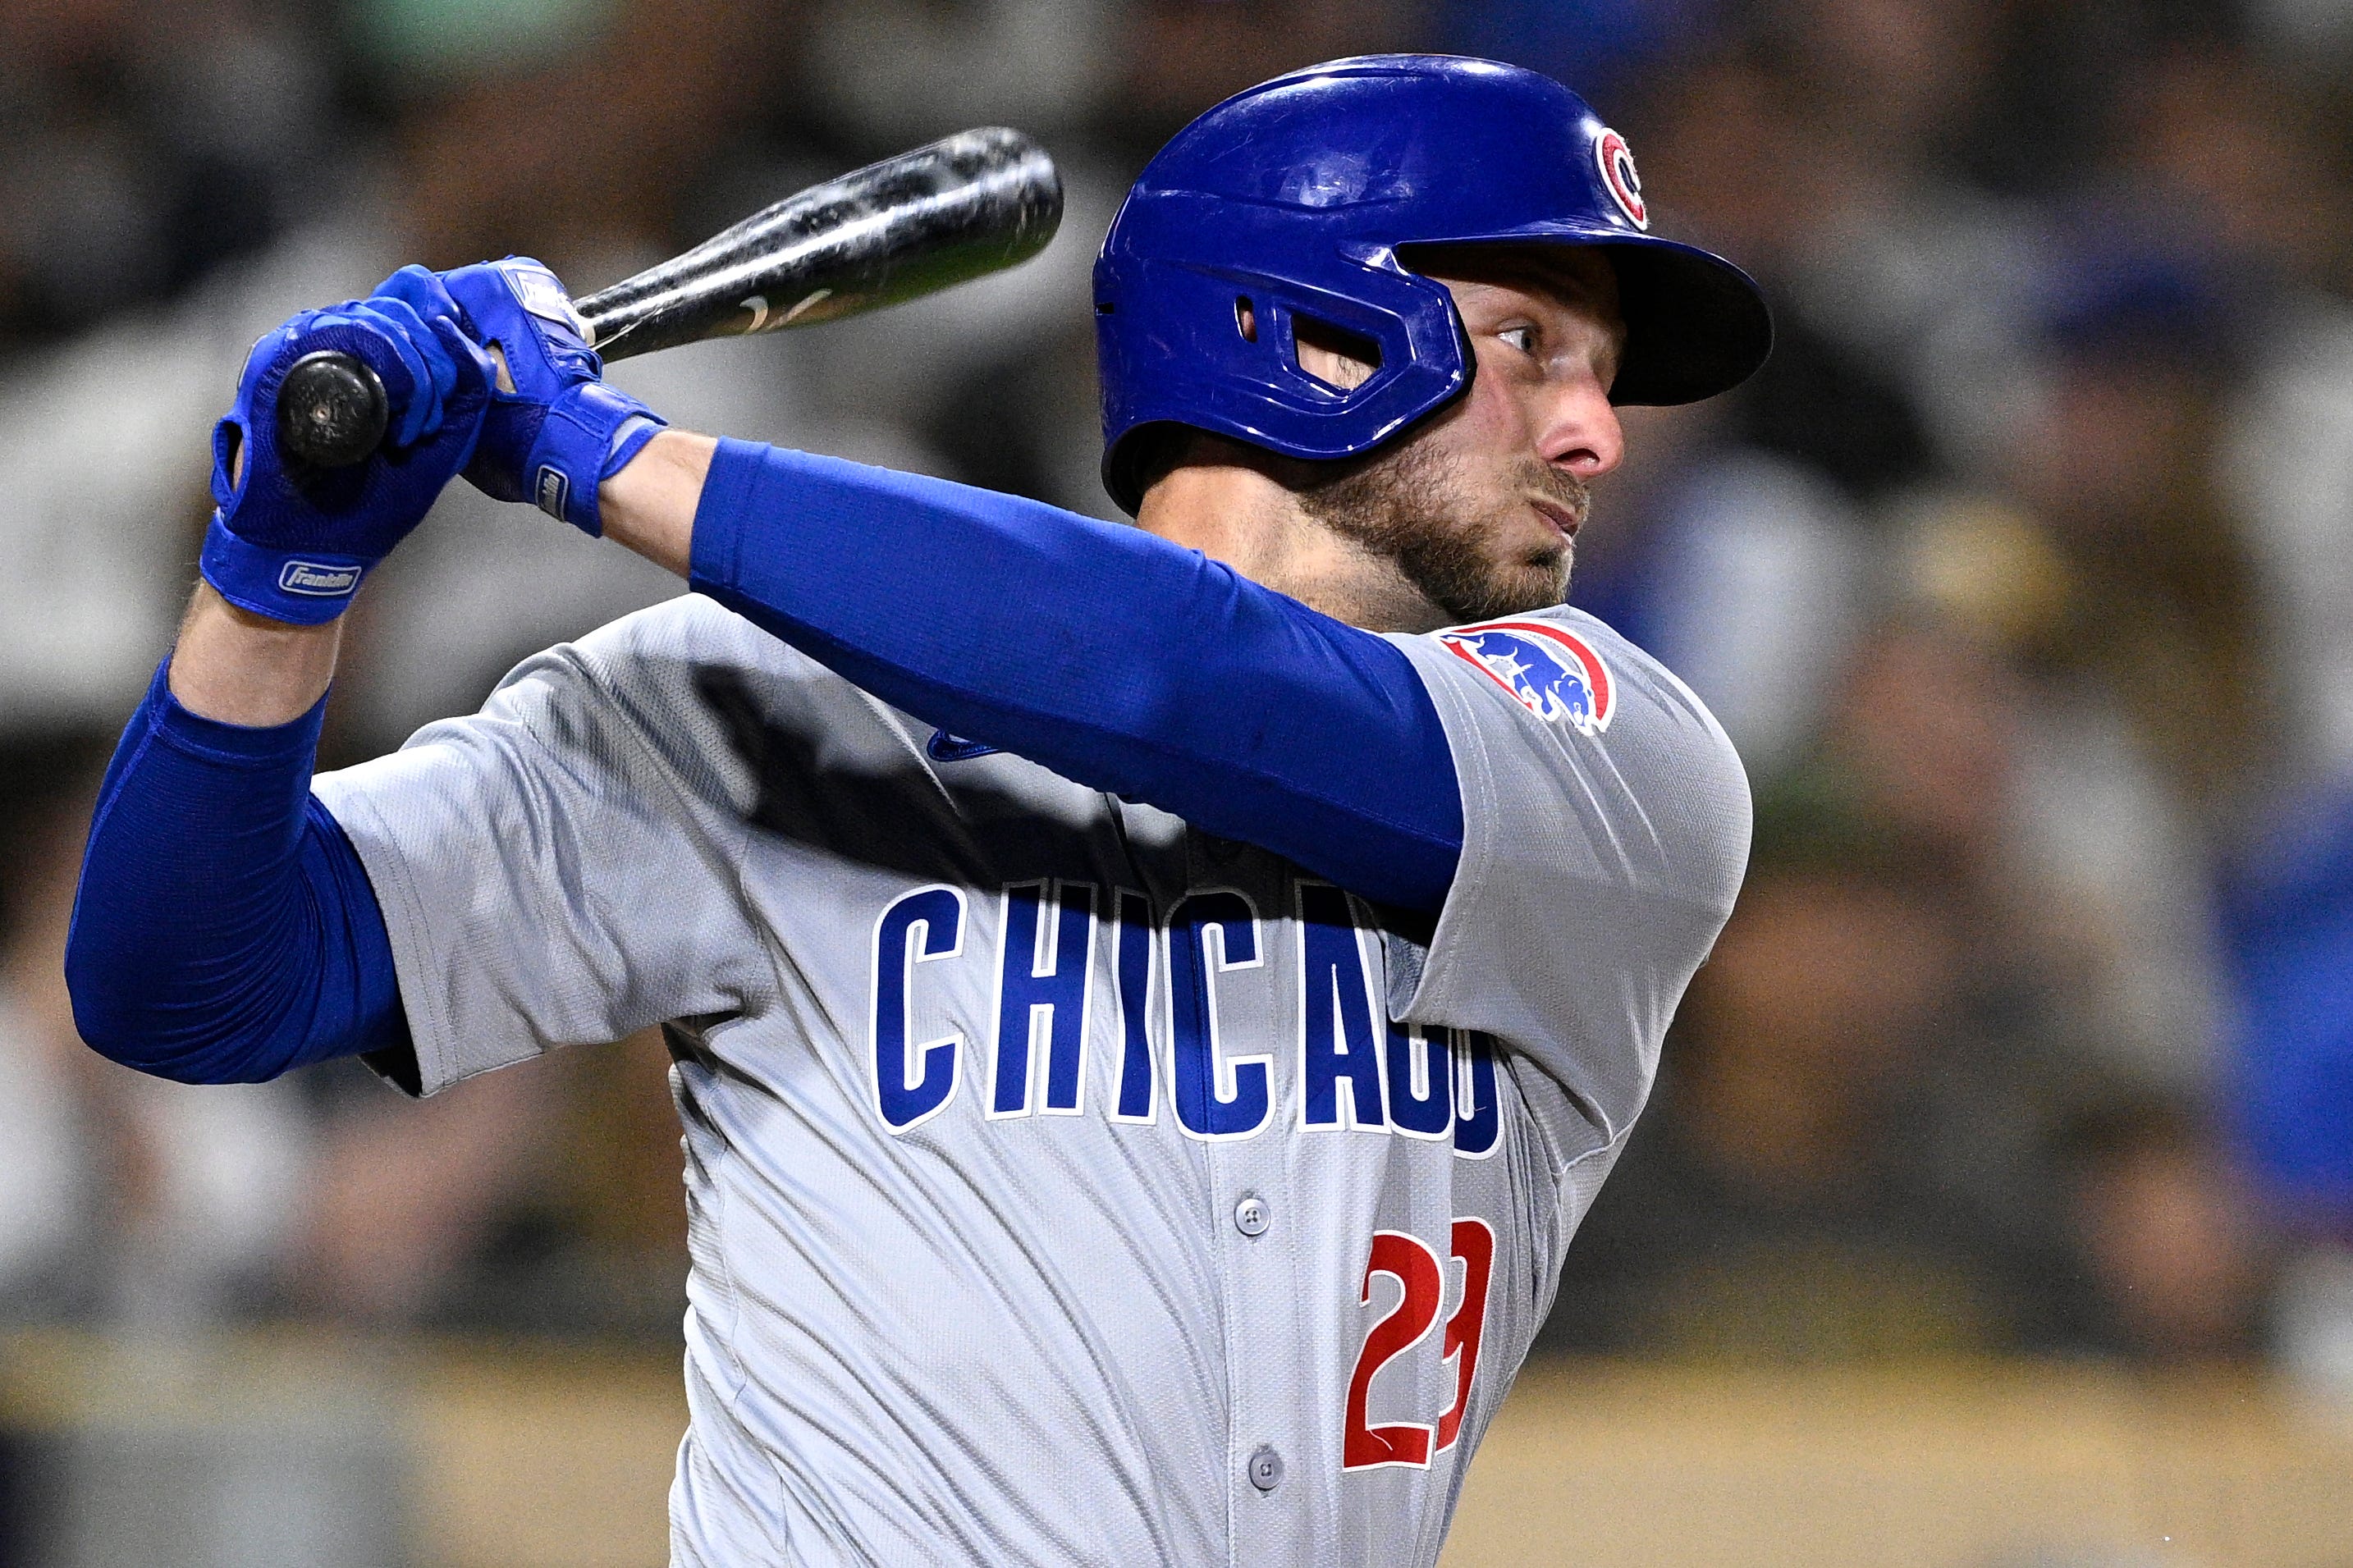 michael busch 'doing damage' for chicago cubs after being boxed out by superstars in la